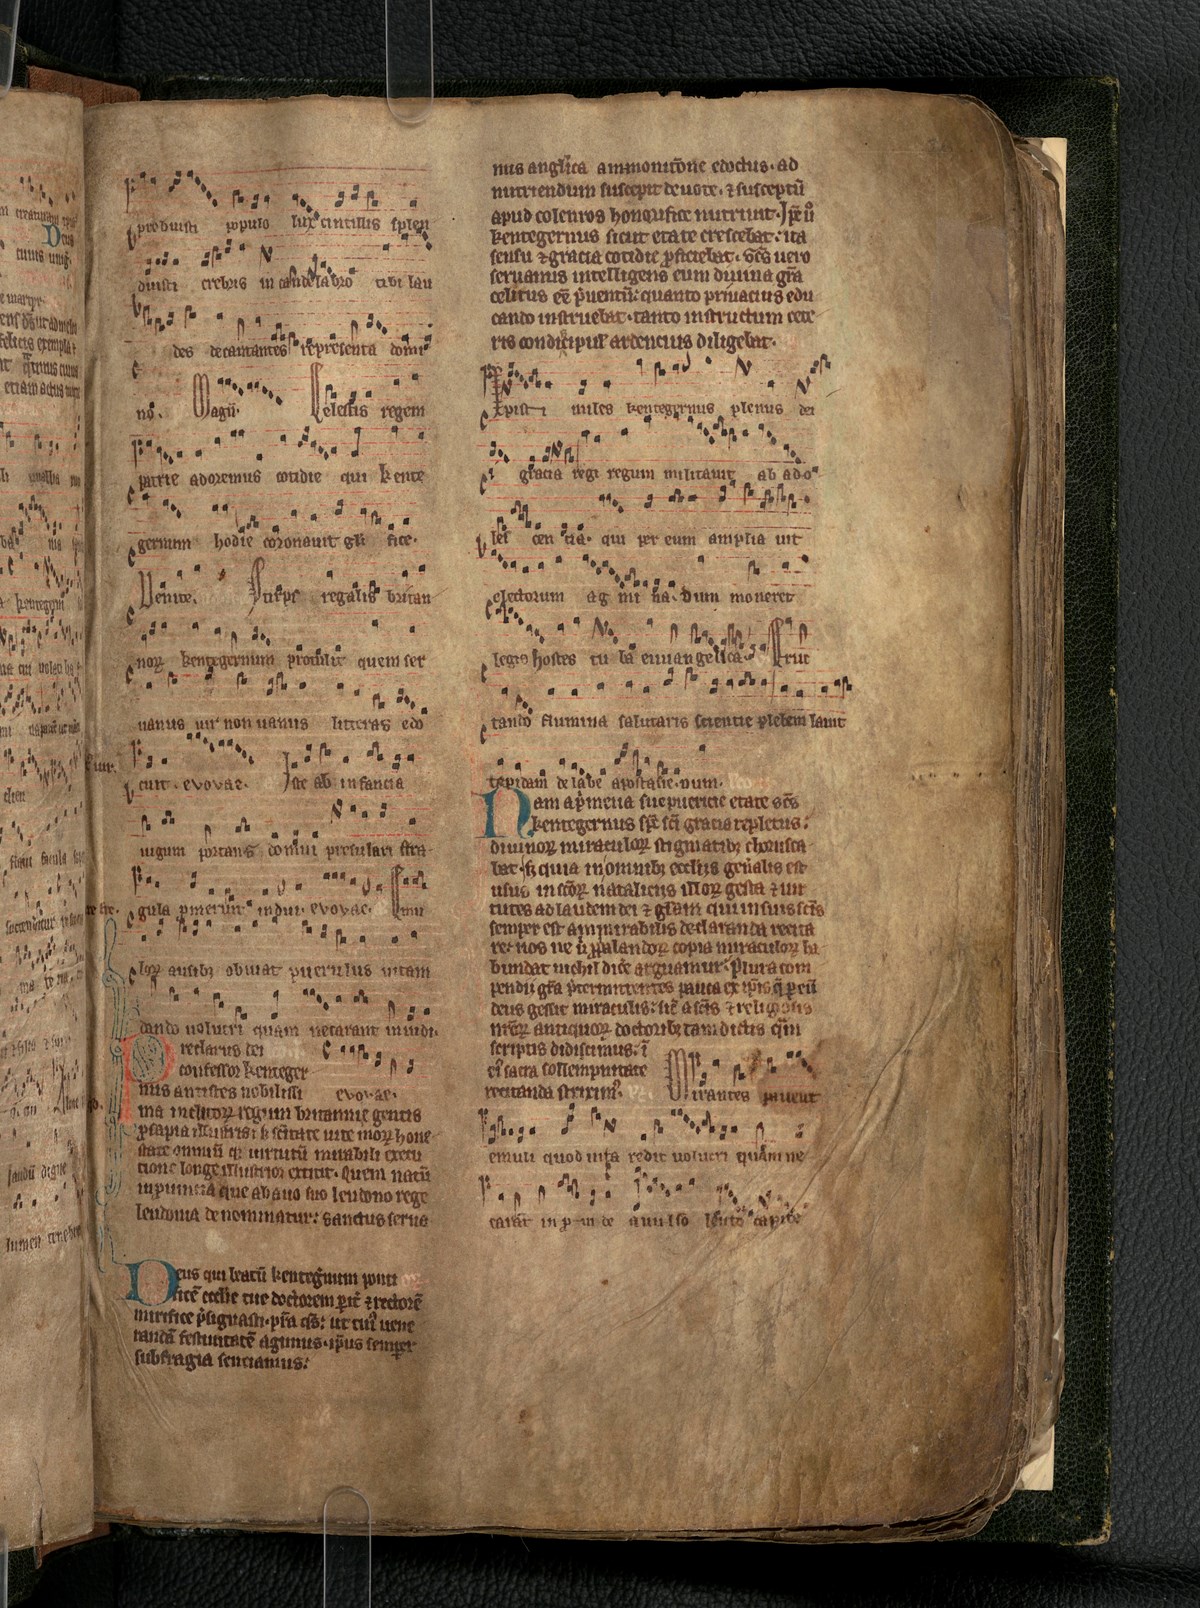 Sprouston Breviary: During the Scottish Reformation (1560) more than 90 per cent of manuscripts of Roman Catholic usage were lost or destroyed. This manuscript dates from the 13th century. It offers a rare glimpse into medieval Scottish worship, including a sung liturgy in celebration of St. Kentige